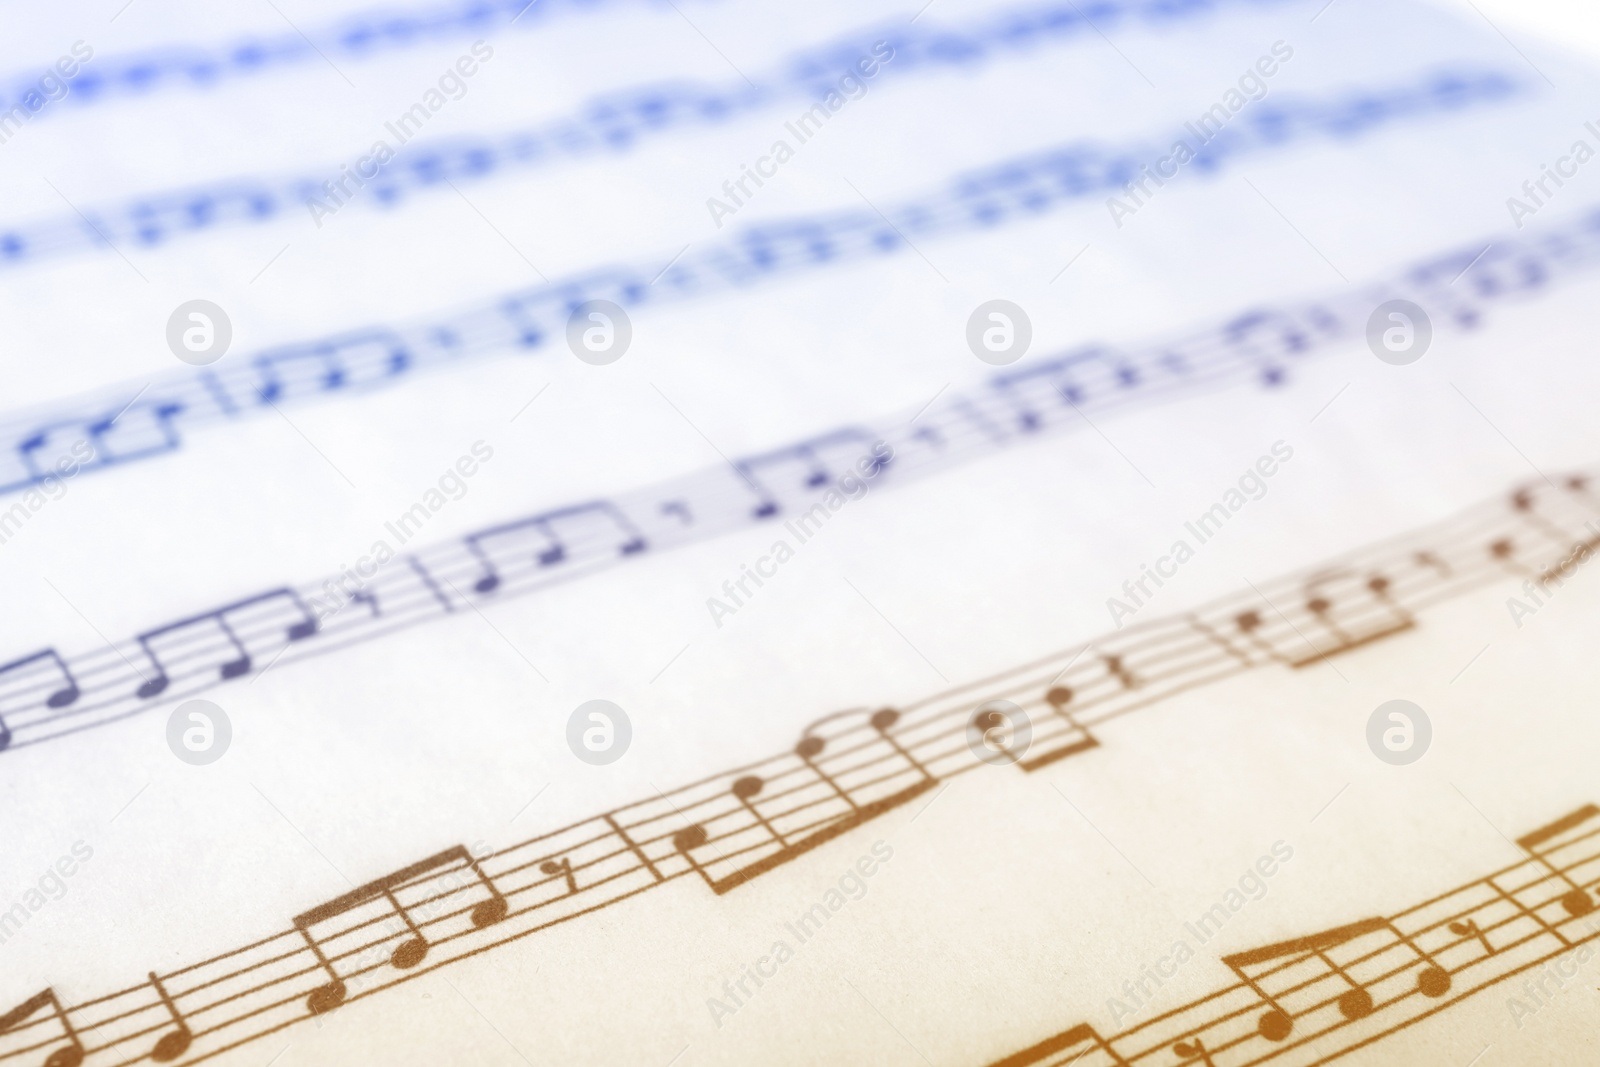 Image of  Sheet with music notes as background, closeup